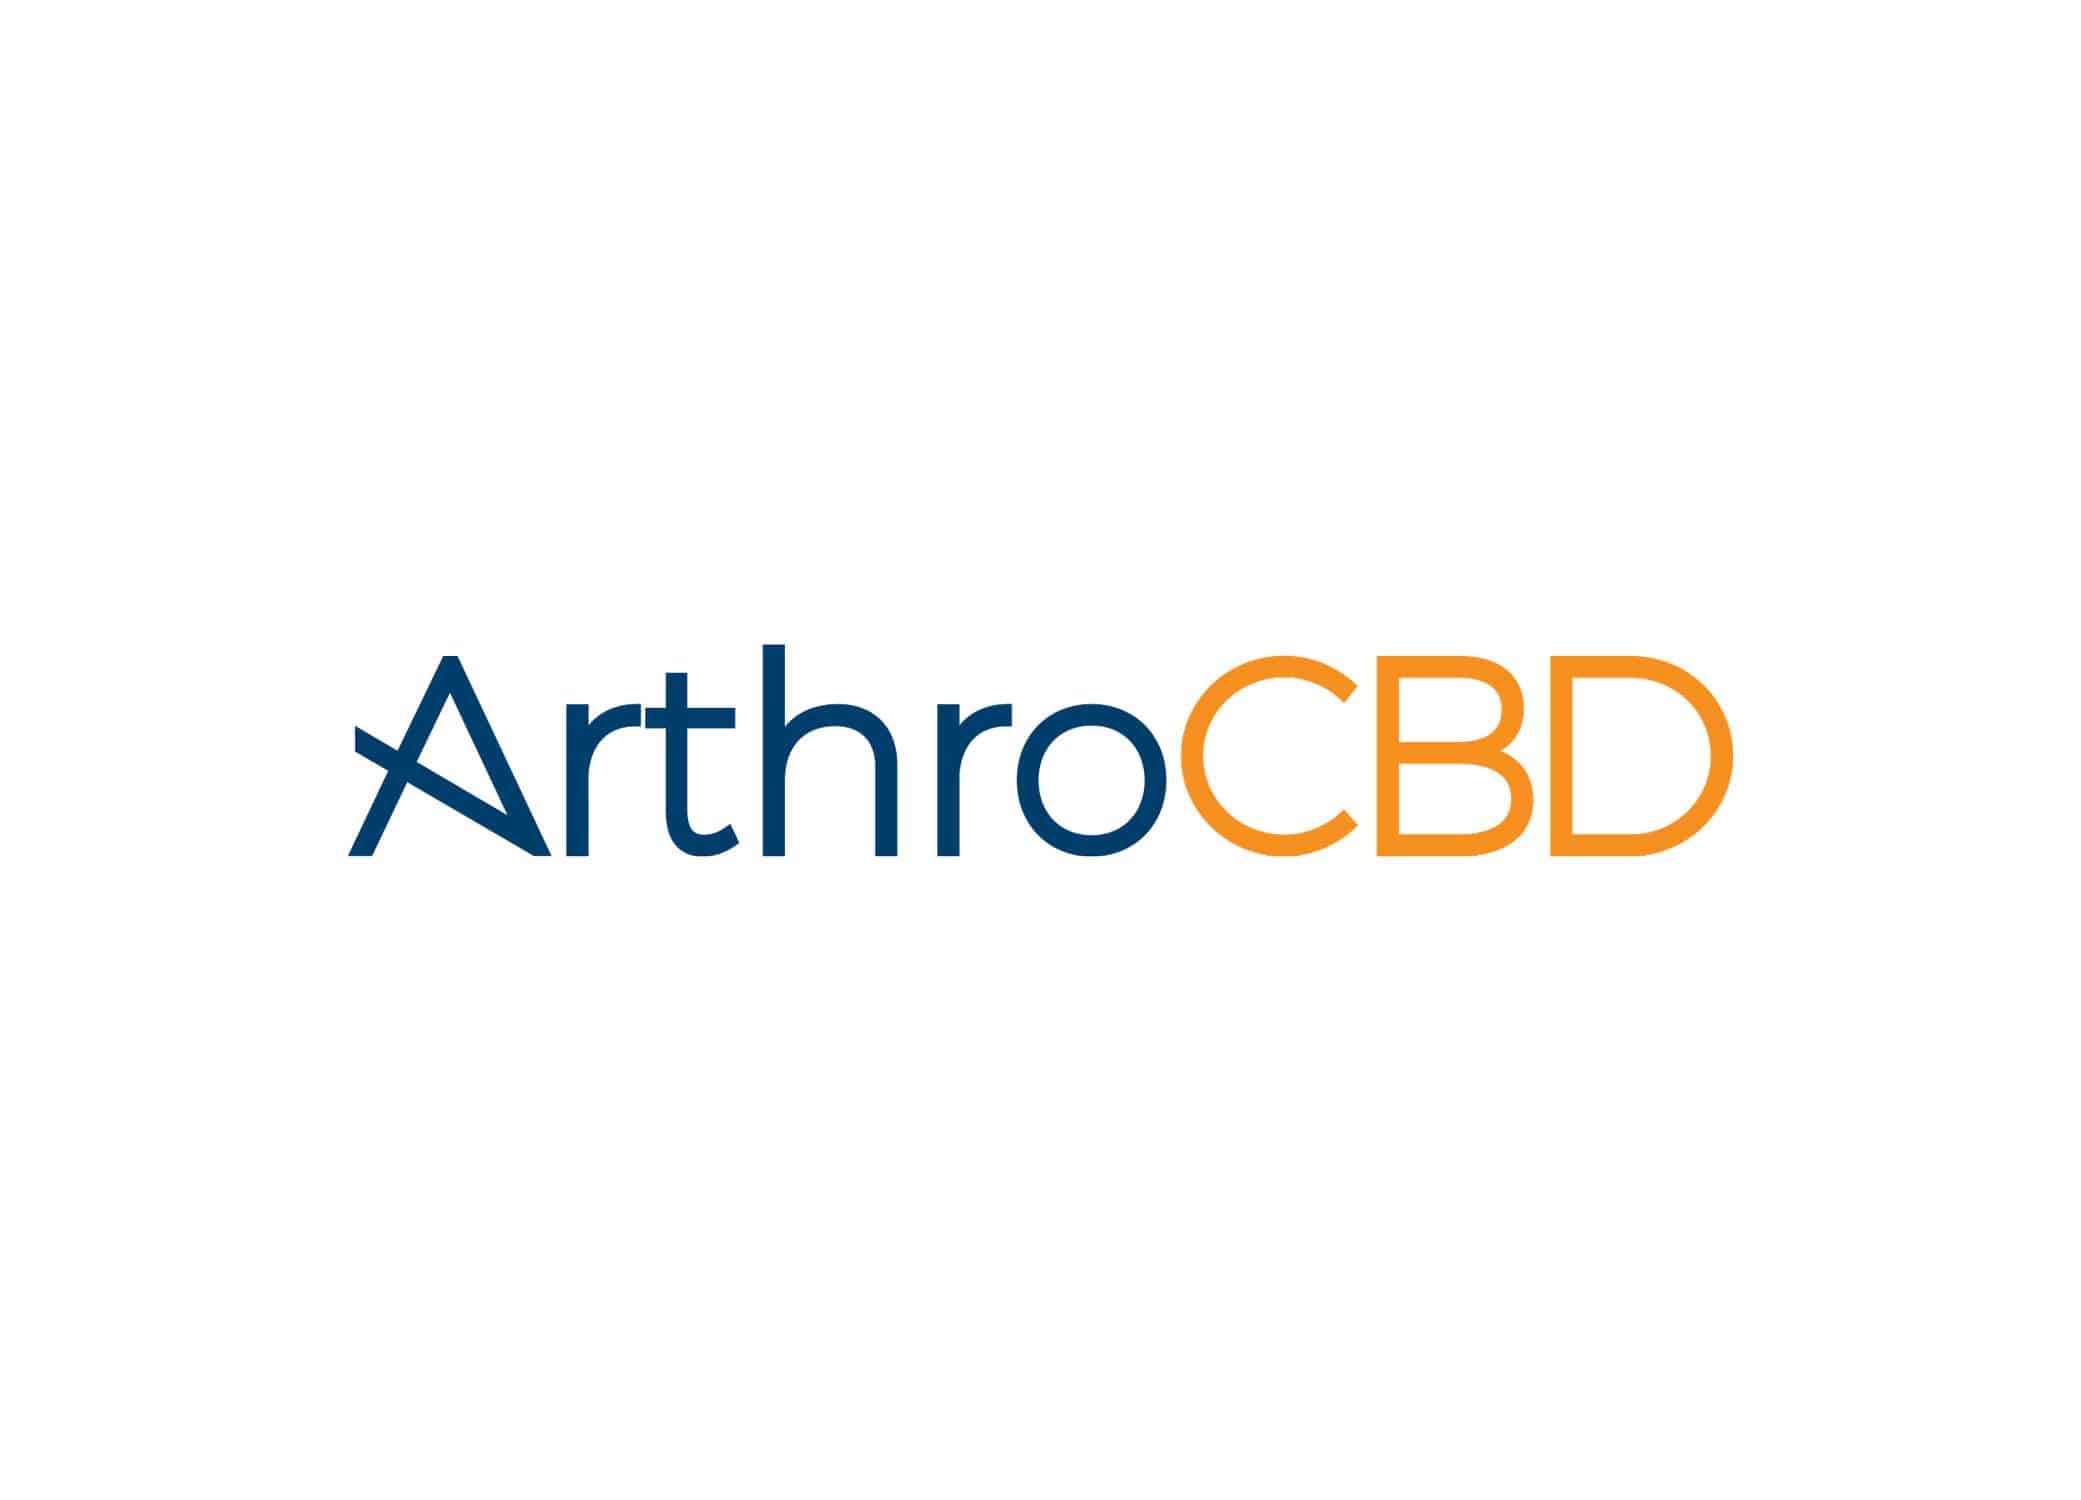 ArthroCBD logo design with diagonal angle across the “A” and navy blue and orange typography.